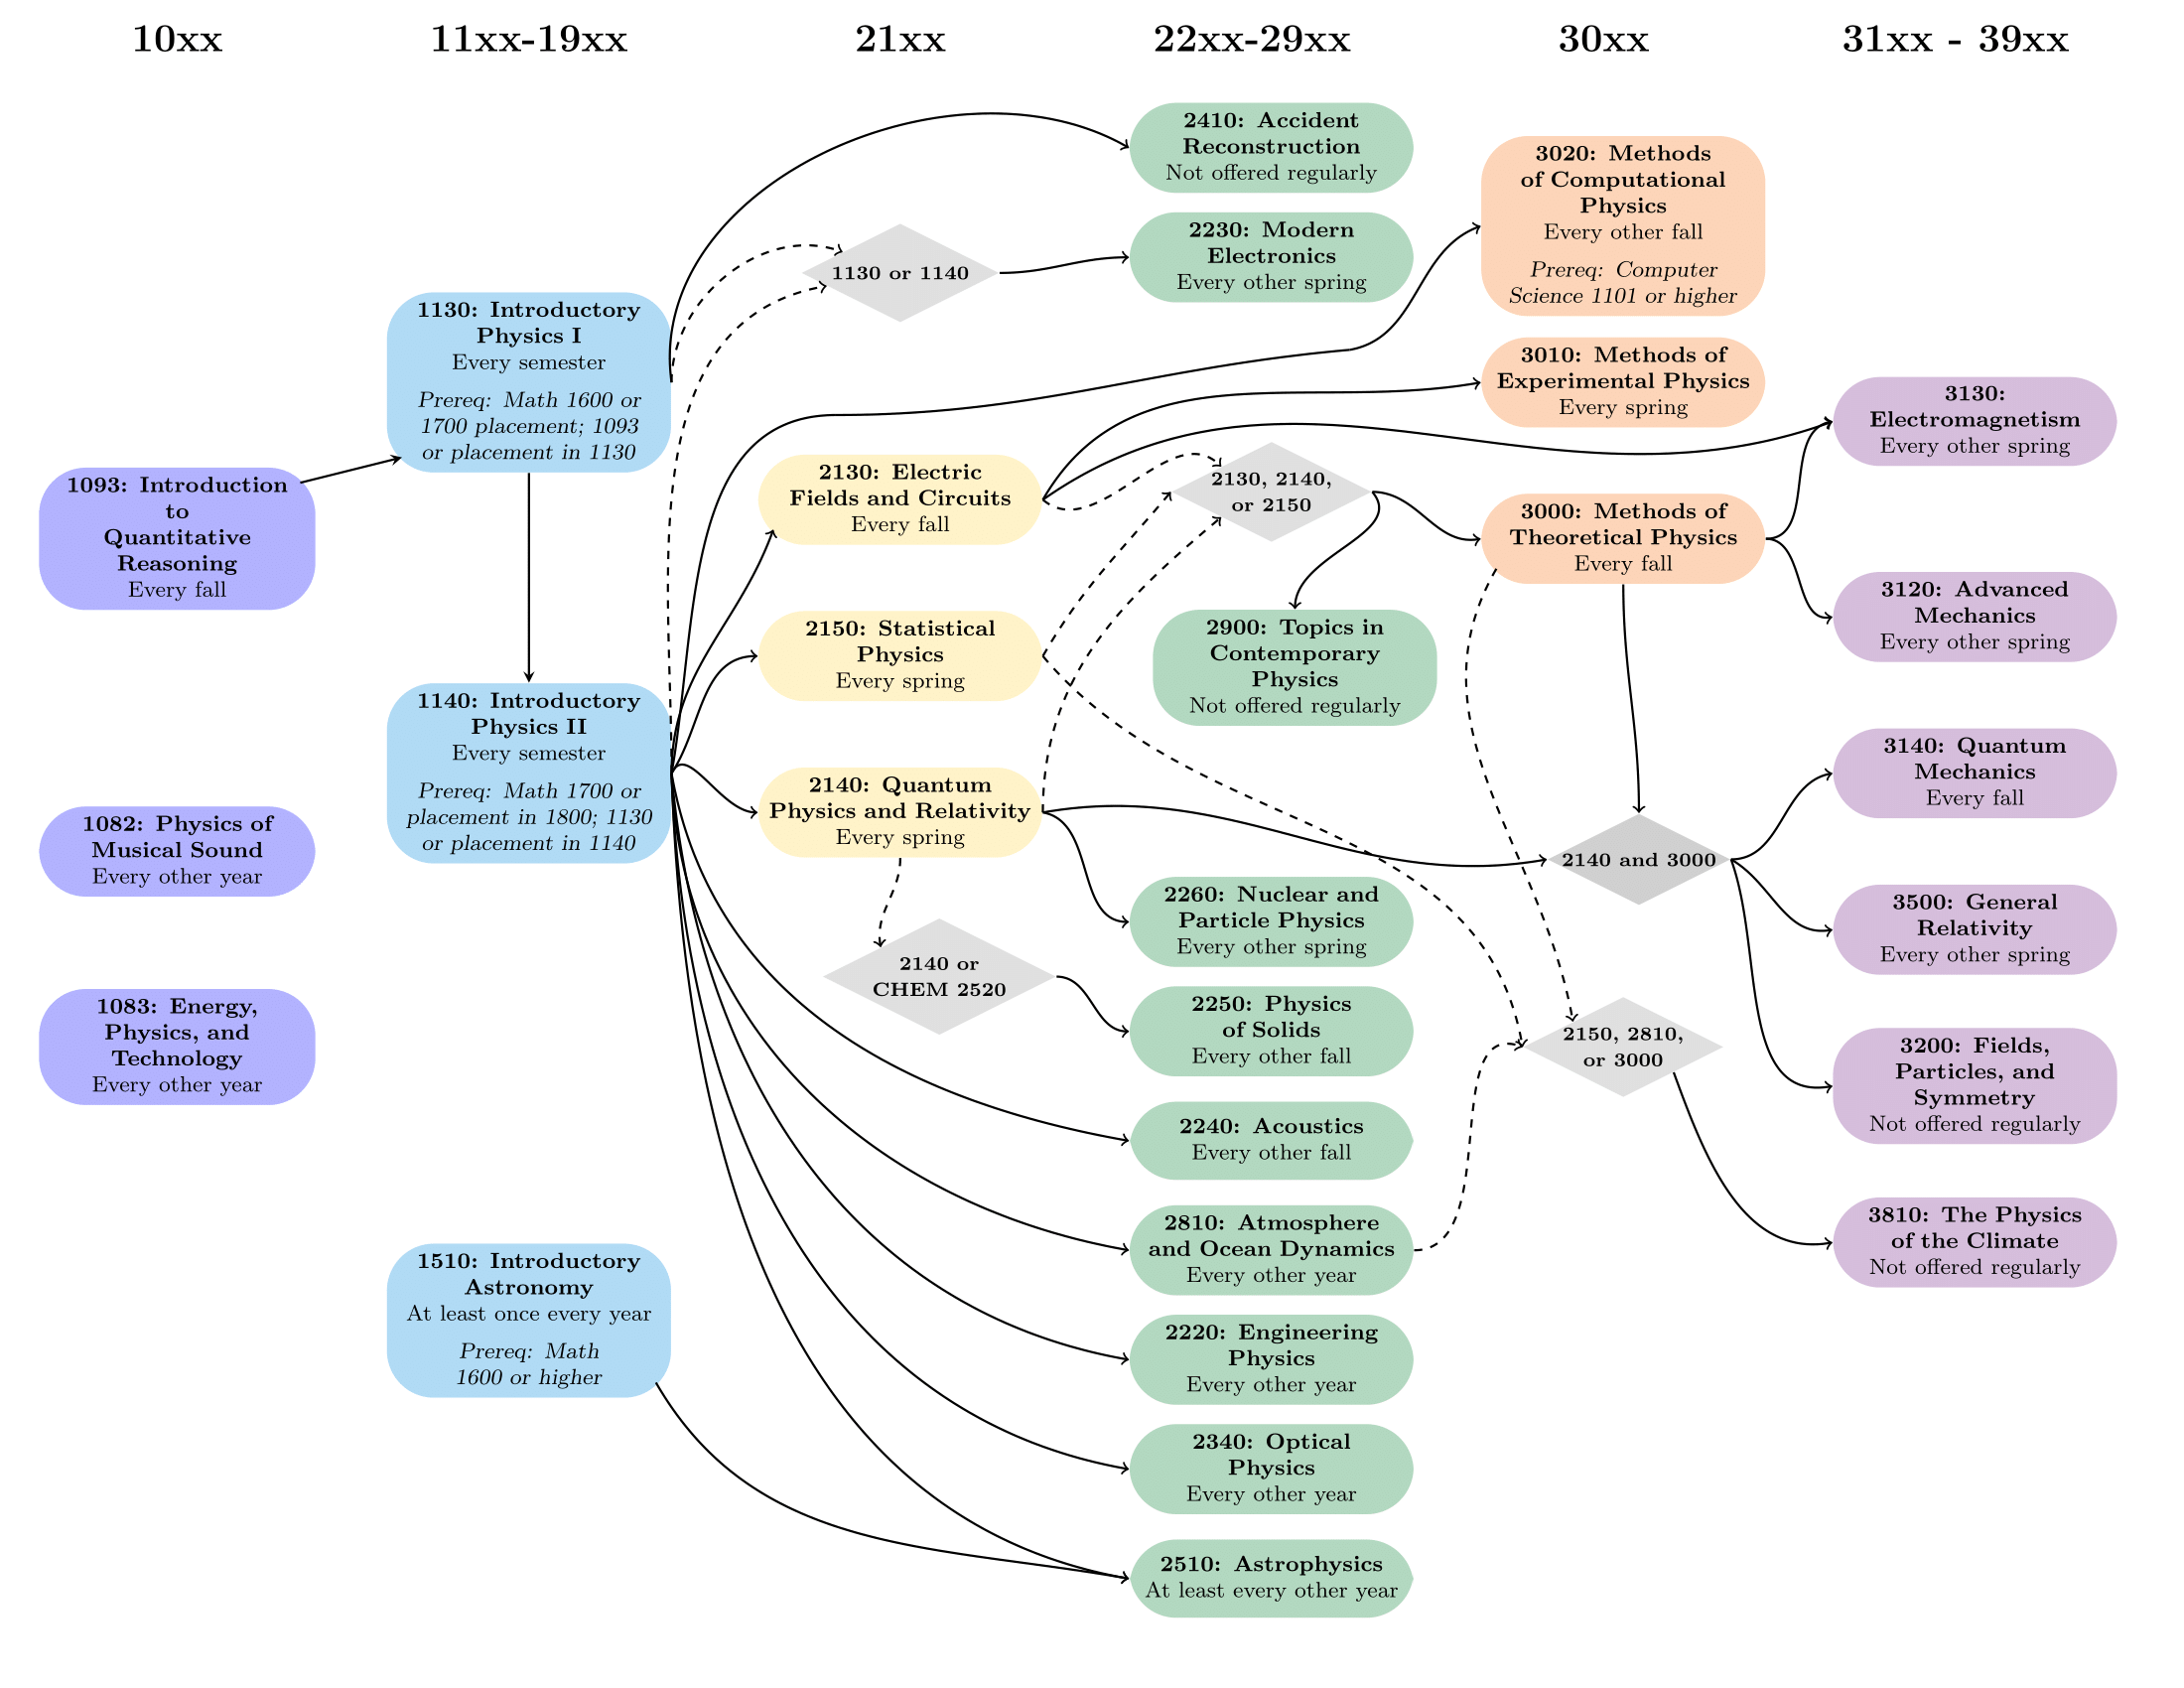 A flowchart that shows possible paths through the physics major.